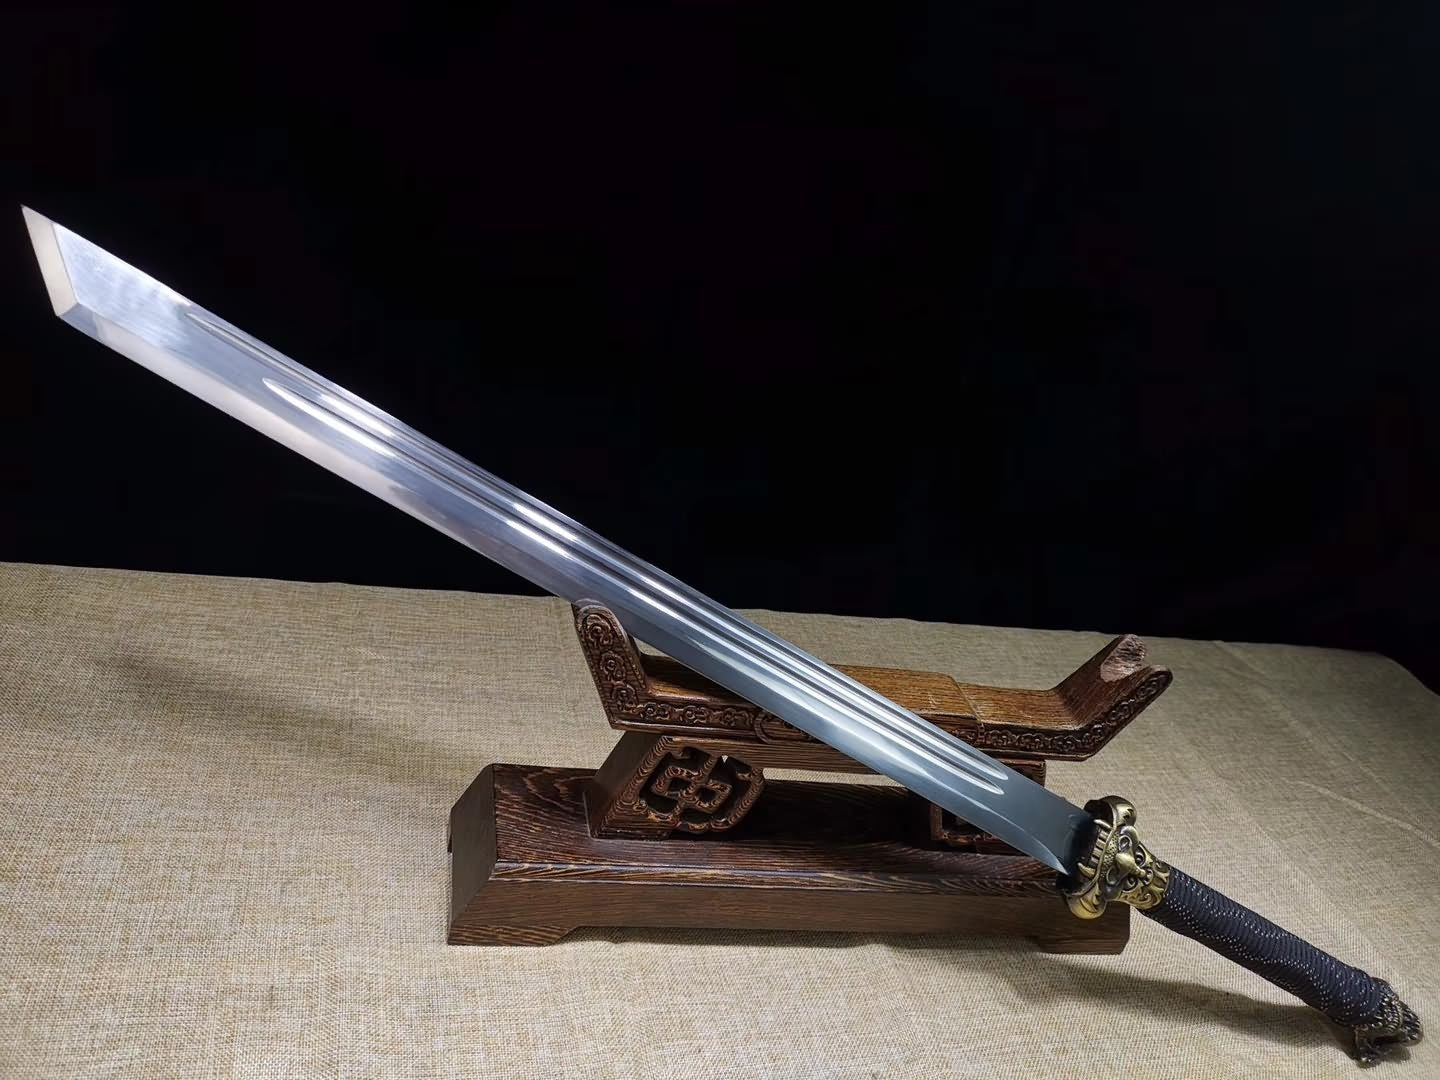 Loong Tang dao sword,High carbon steel blade,Battle ready - Chinese sword shop